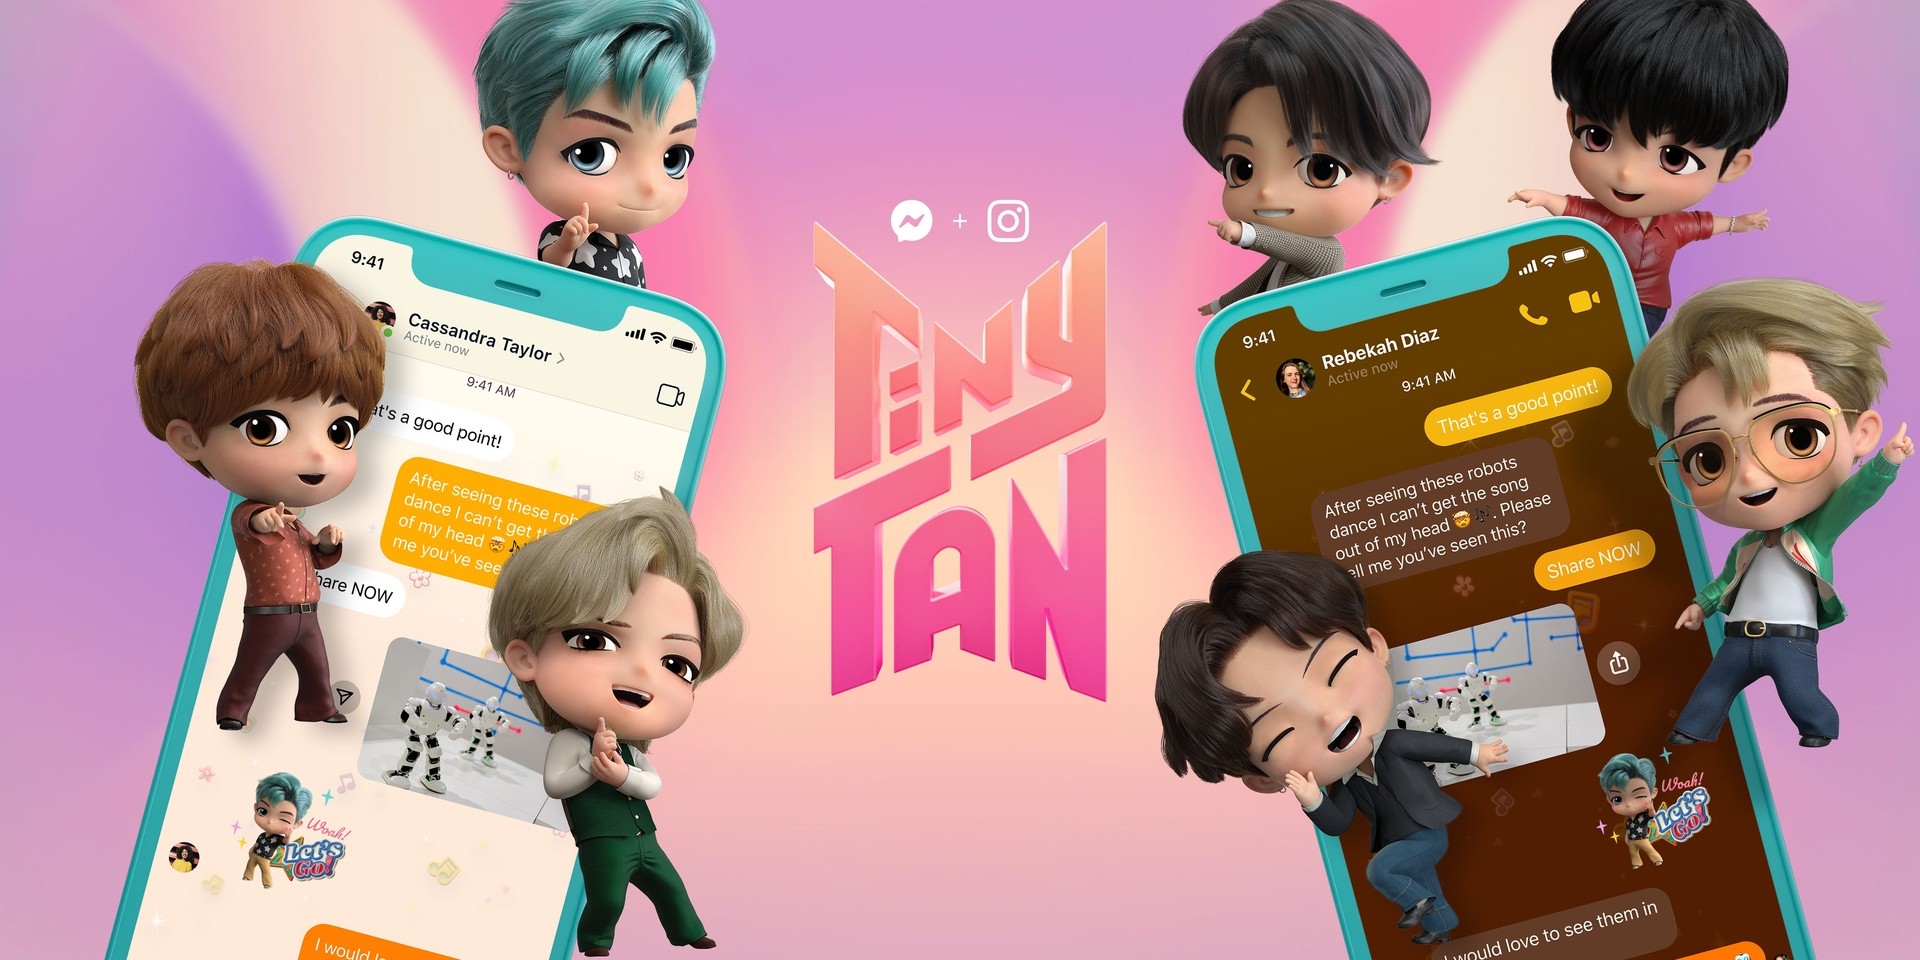 BTS' TinyTAN roll out new 'Dynamite' chat experience on Messenger and Instagram